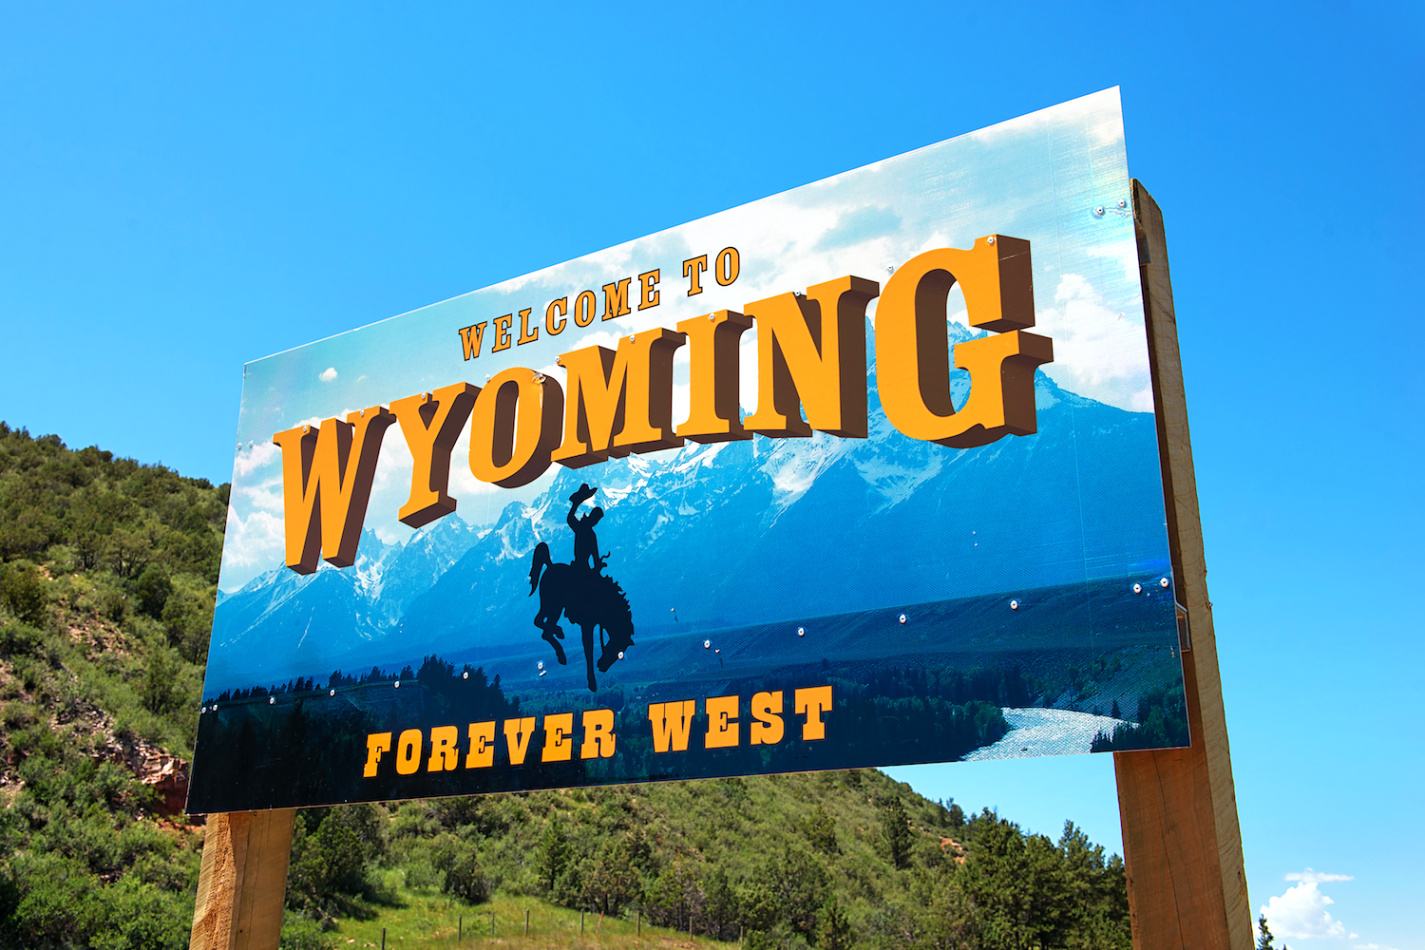 Cheap Vpn In Carbon Wy Dans Coinbase Resumes Bitcoin Buying and Selling In Wyoming - Coindesk